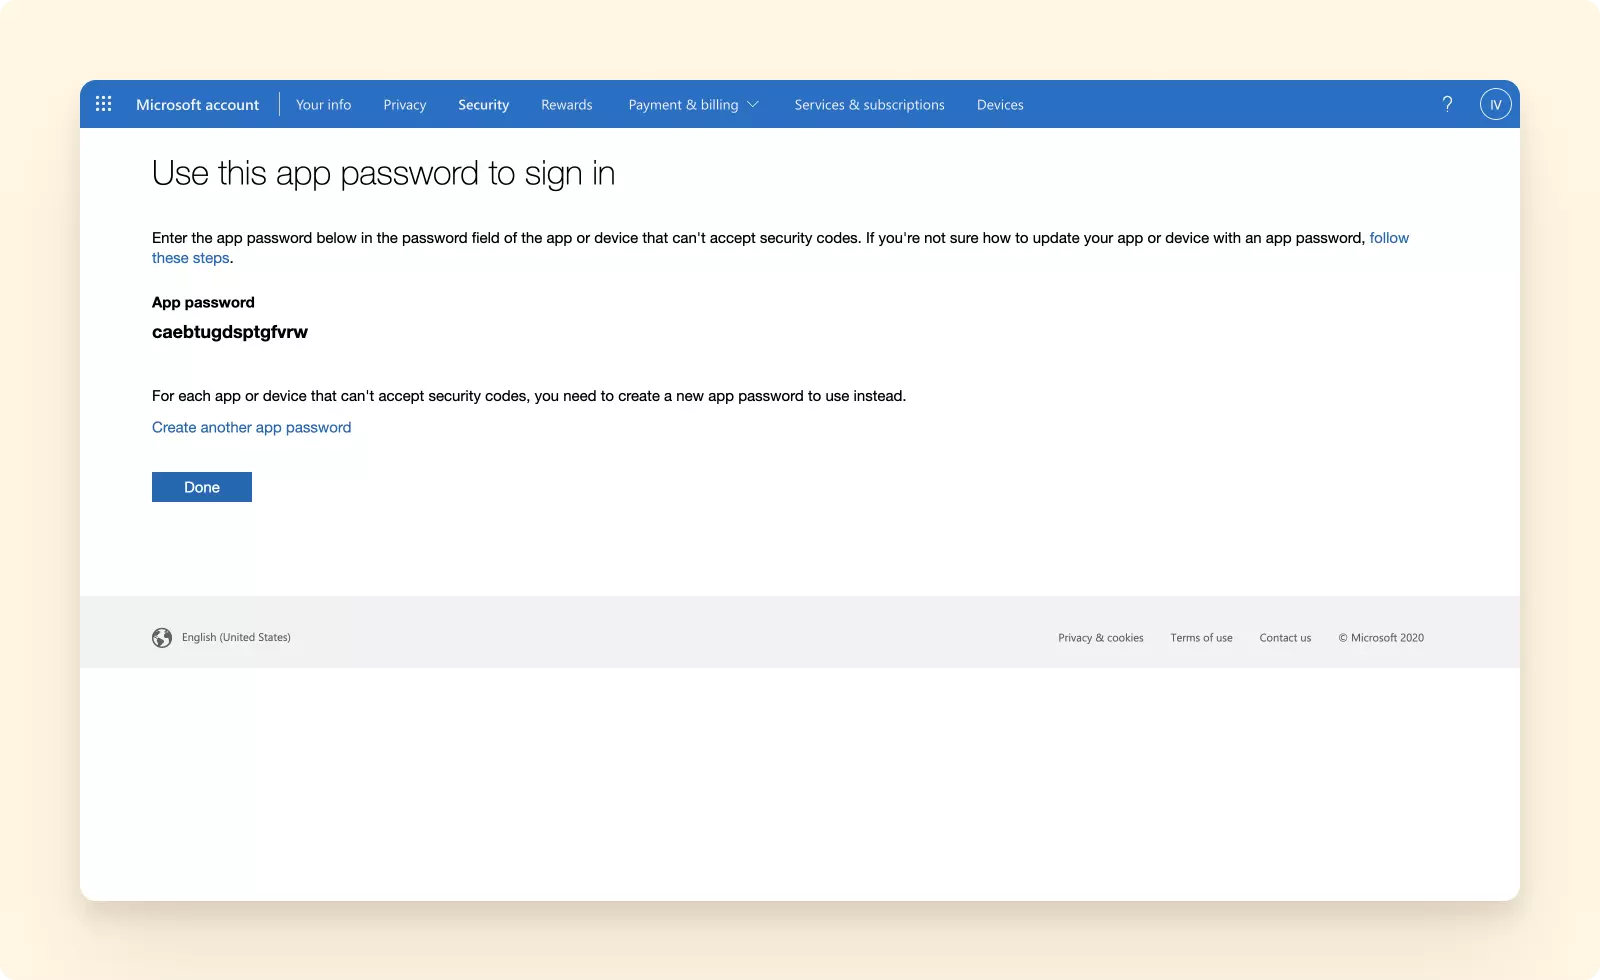 Example of an app password generated by Outlook